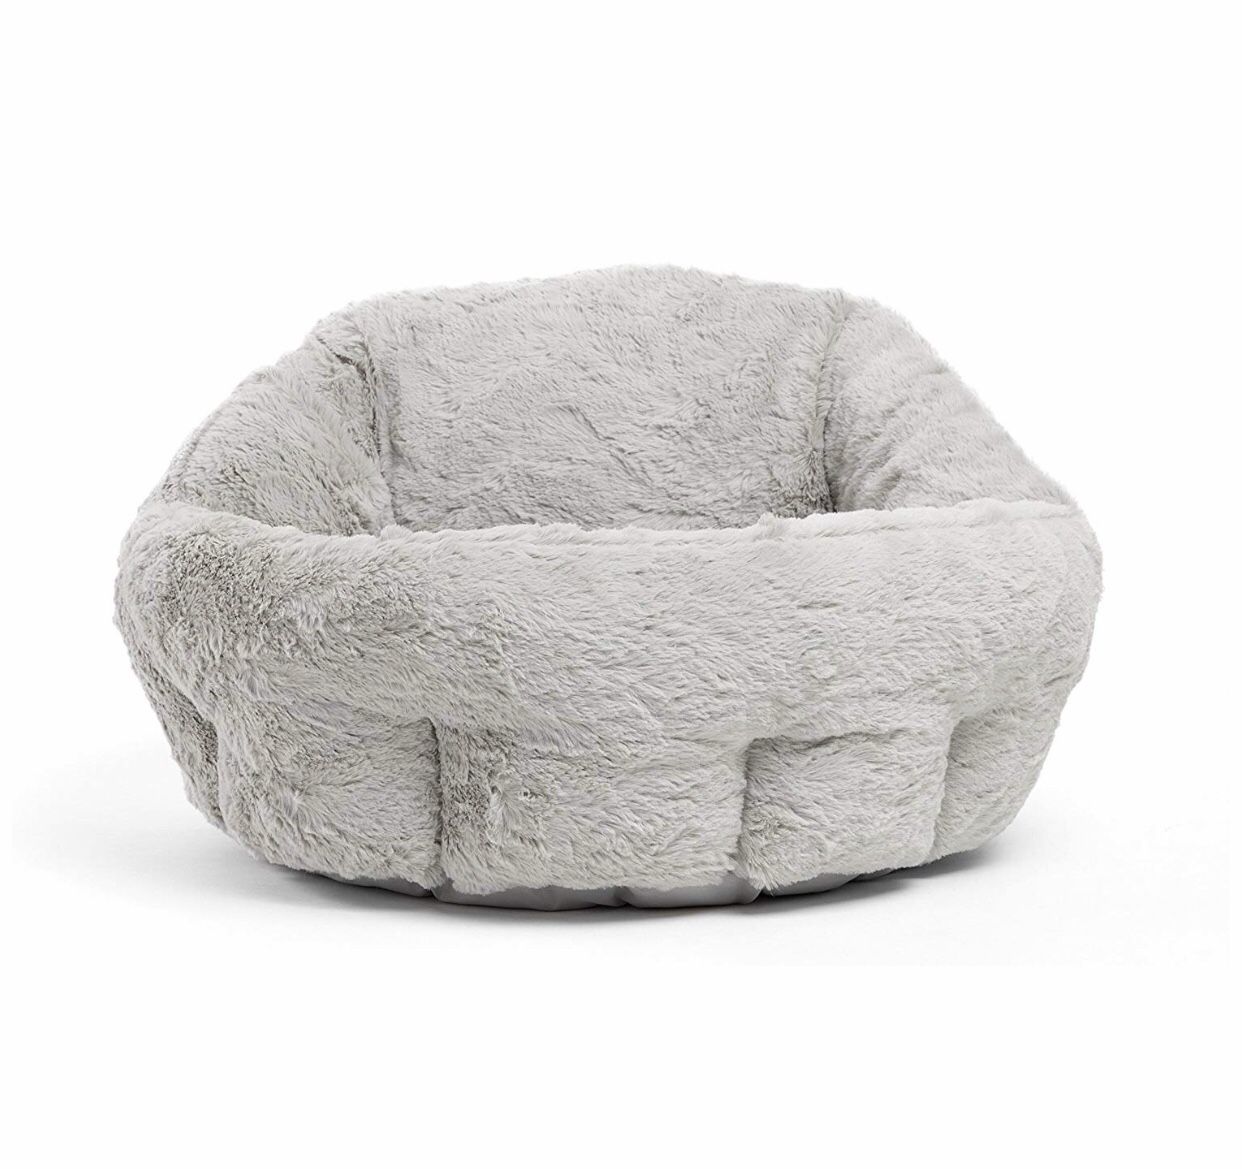 Brand New Cat or Dog Bed - Super Soft Grey Lux